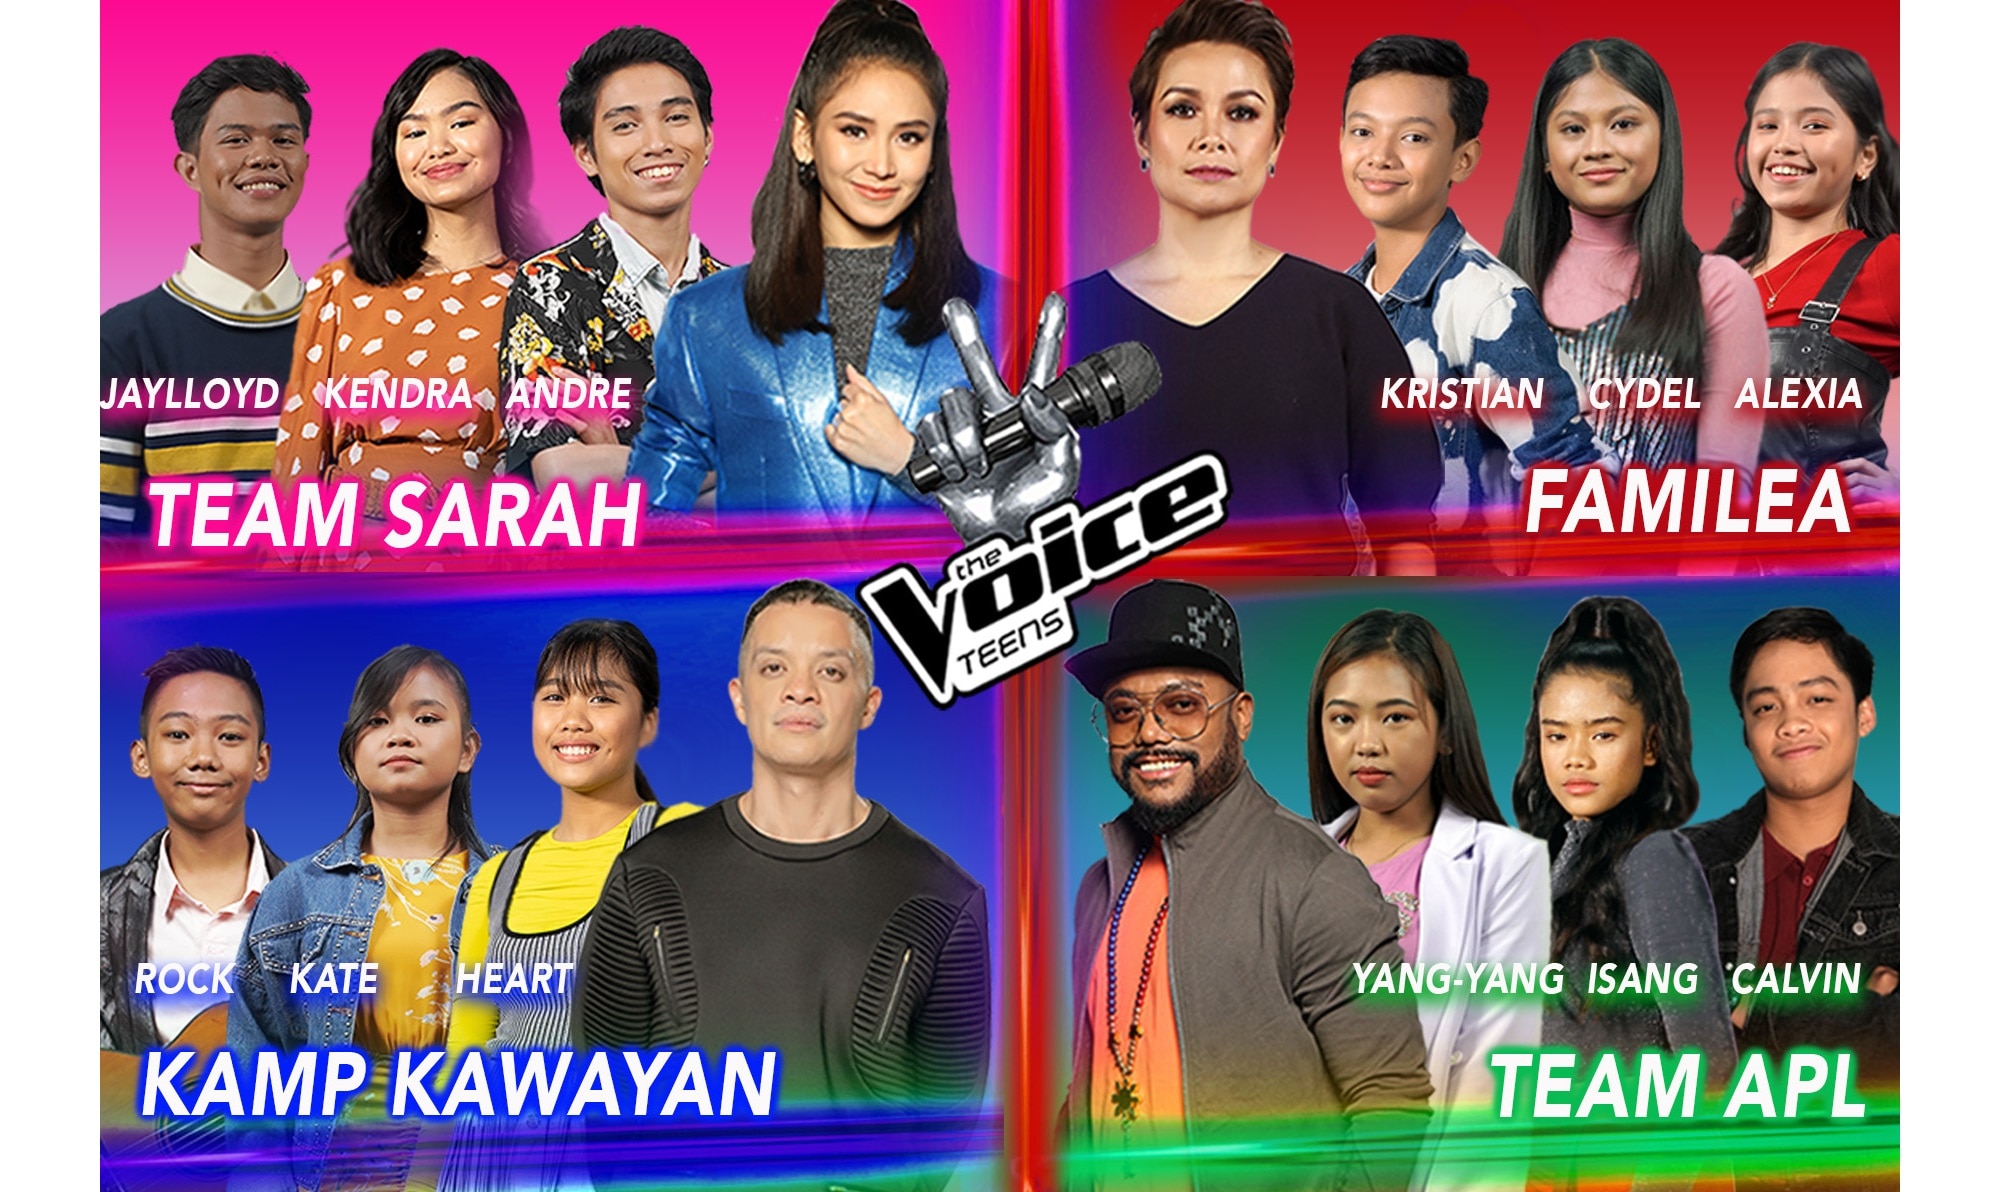 Top 12 artists of "The Voice Teens" compete to become grand champion in finale weekend